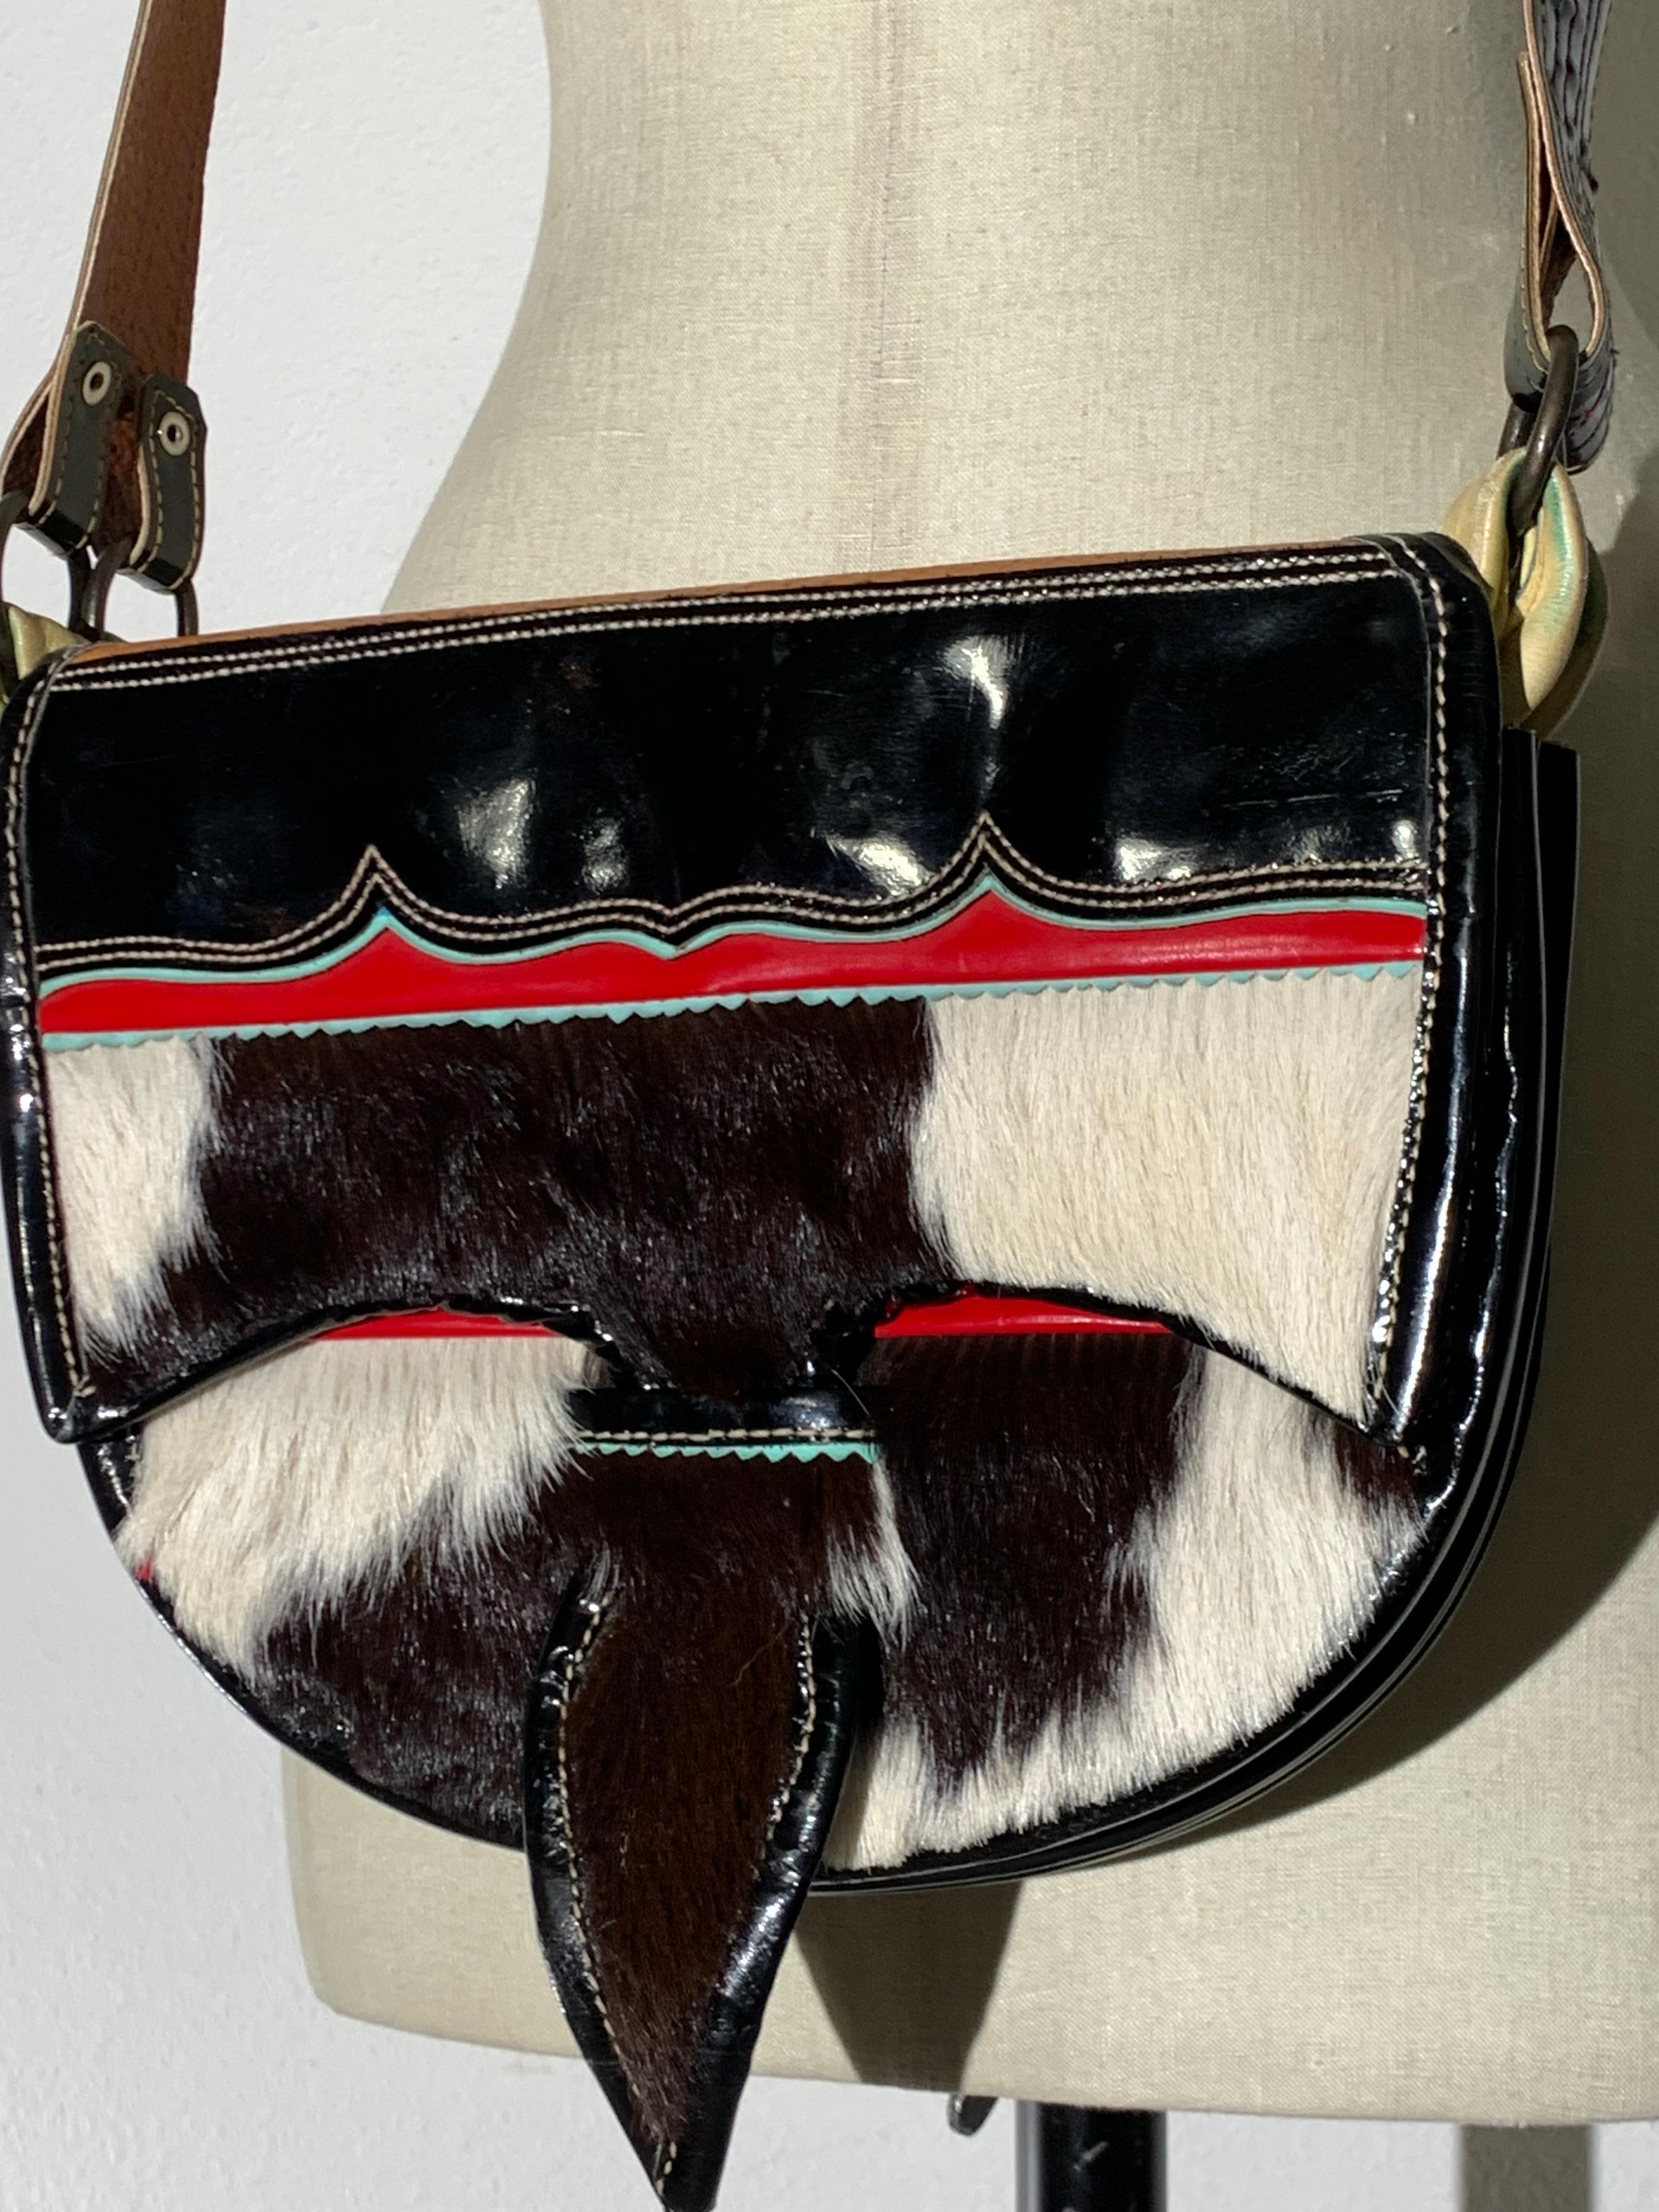 1980s Western-Inspired Black/White Cowhide & Patent Leather Saddle Shoulder Bag: Accordion-style expanding compartments with sliding tab closure on flap. Wide adjustable shoulder strap. Red leather interior lining. Zippered inside pocket. Medium